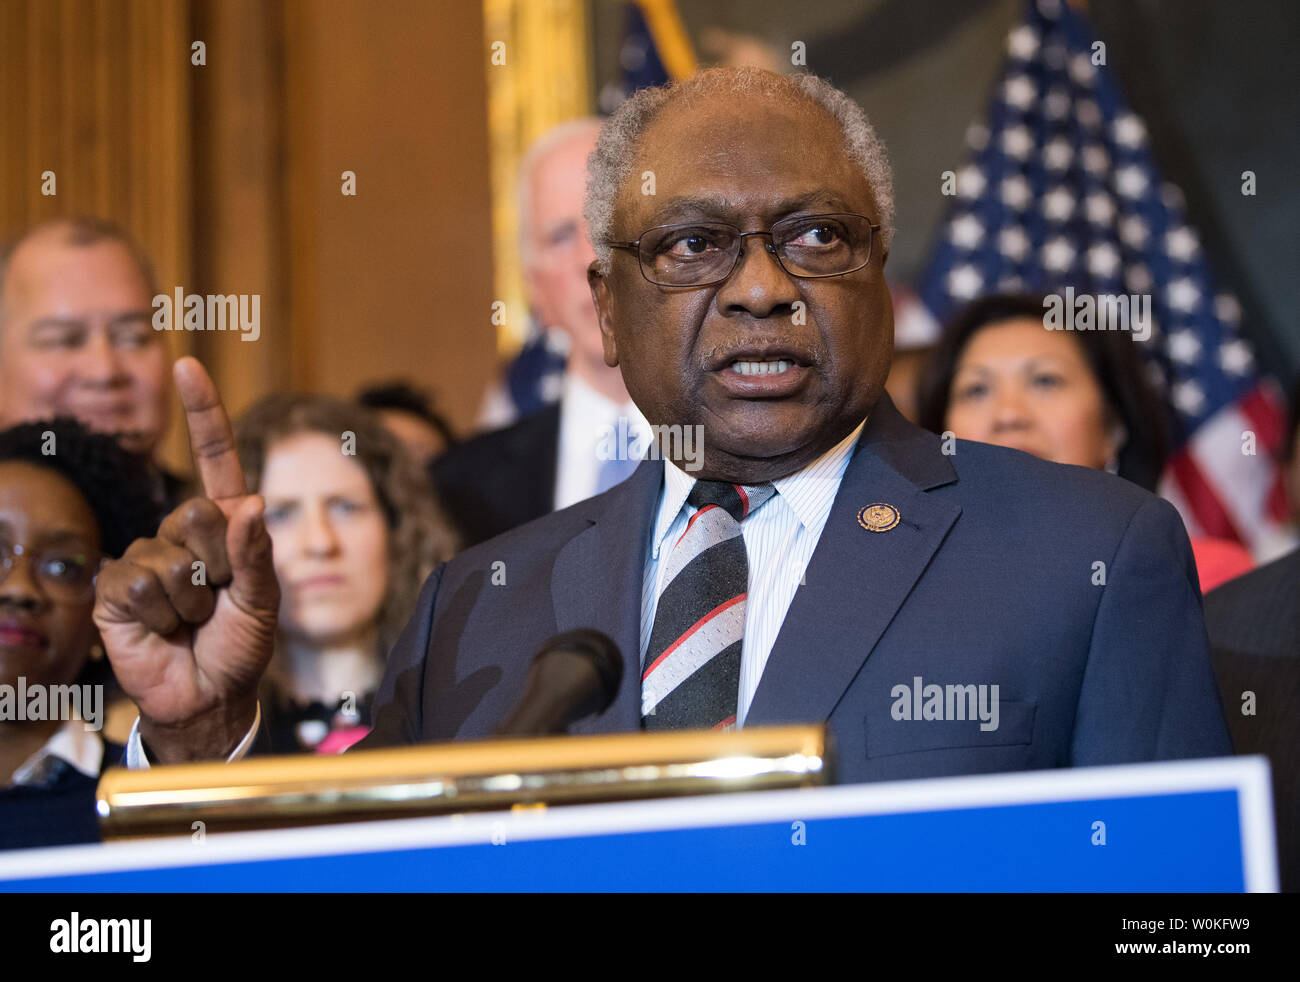 Rep. James Clyburn, D-SC, at a press conference on introducing the Protecting Pre-existing Conditions and Making Health Care More Affordable Act of 2019, that aims to protect the coverage of pre-existing conditions which was recently challenged in the court systems, on Capitol Hill in Washington, D.C. on March 26, 2019. Photo by Kevin Dietsch/UPI Stock Photo